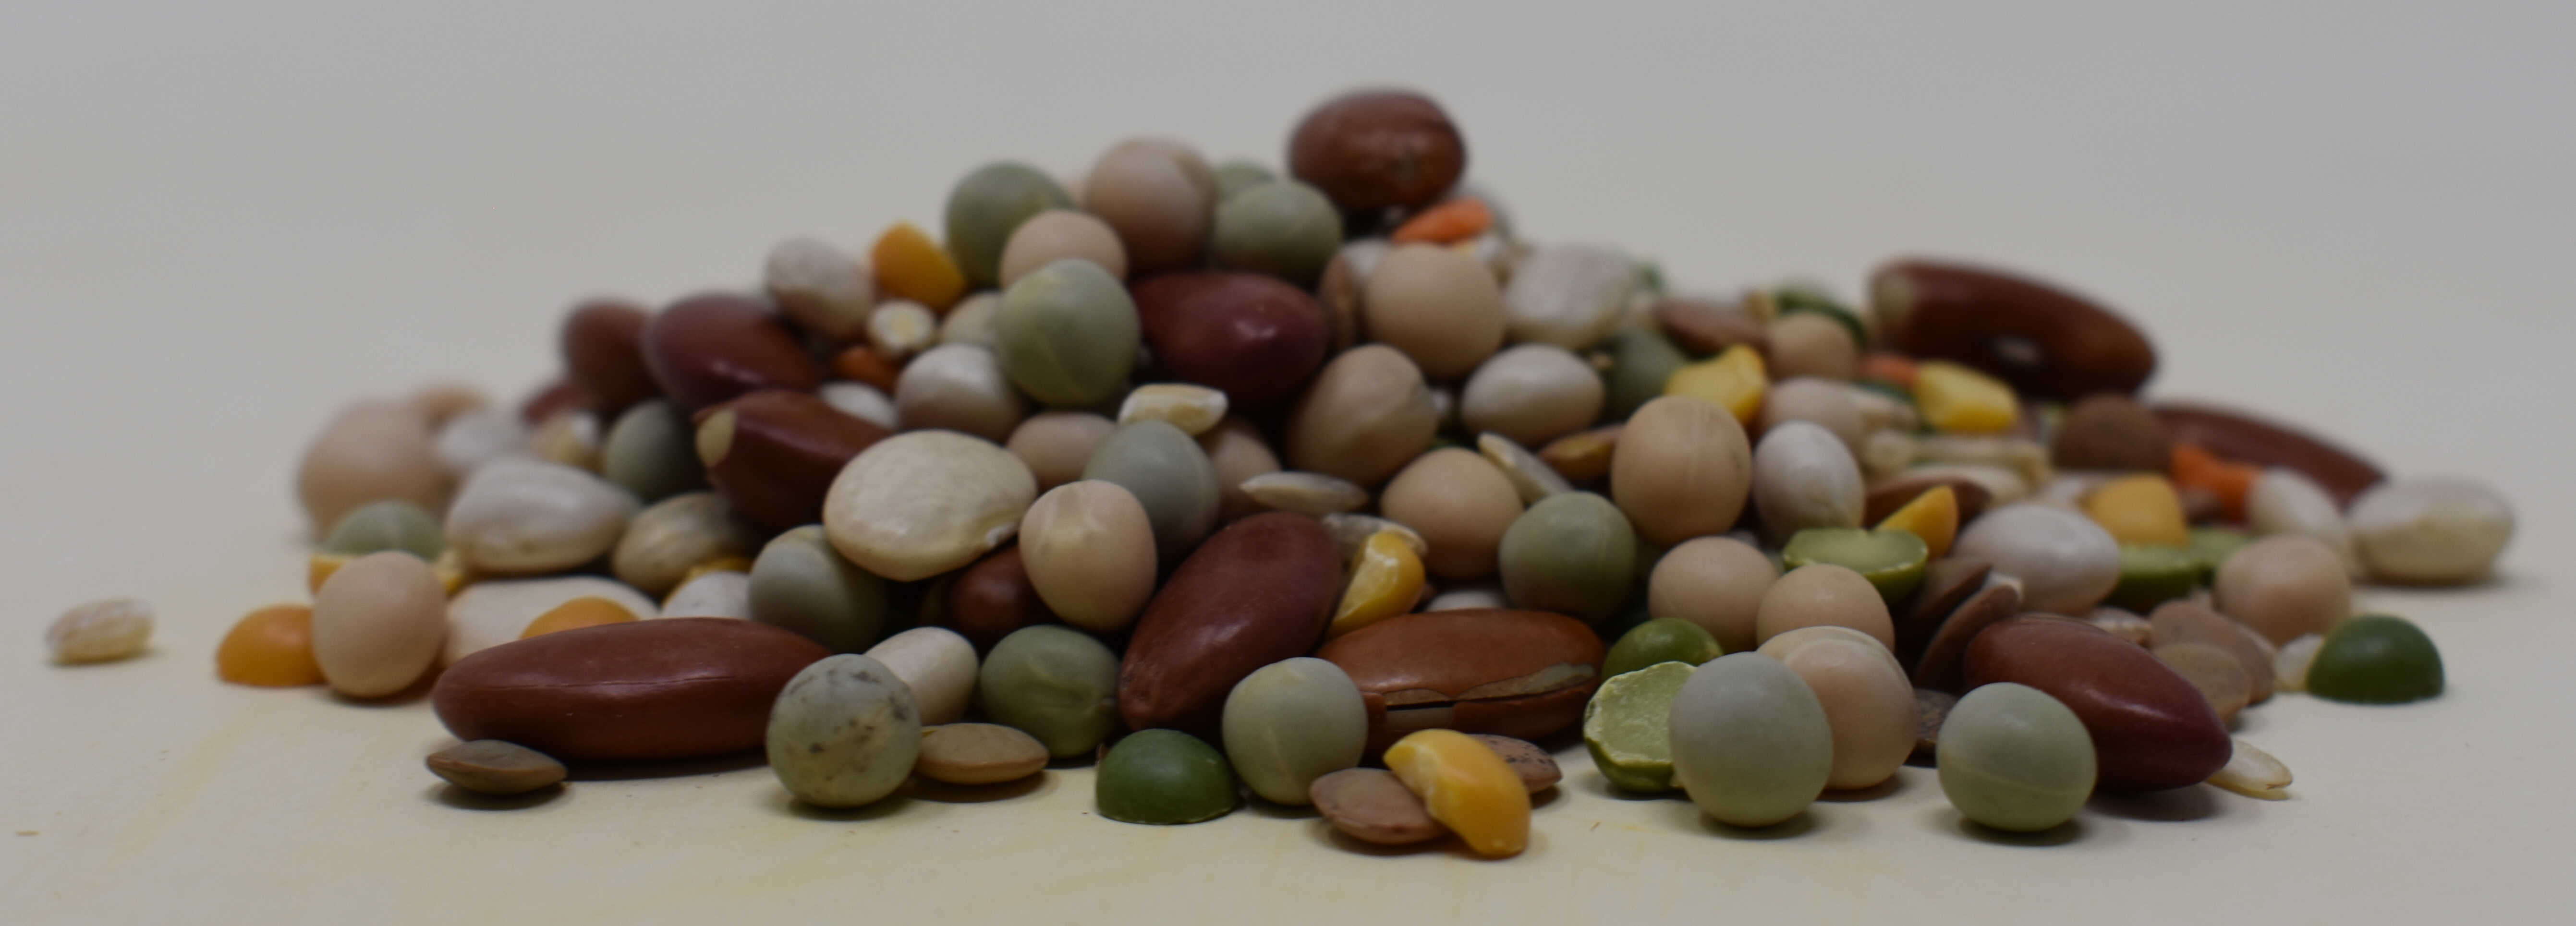 Bean Soup Mix <BR>(11 Beans and Grains) - Side Photo